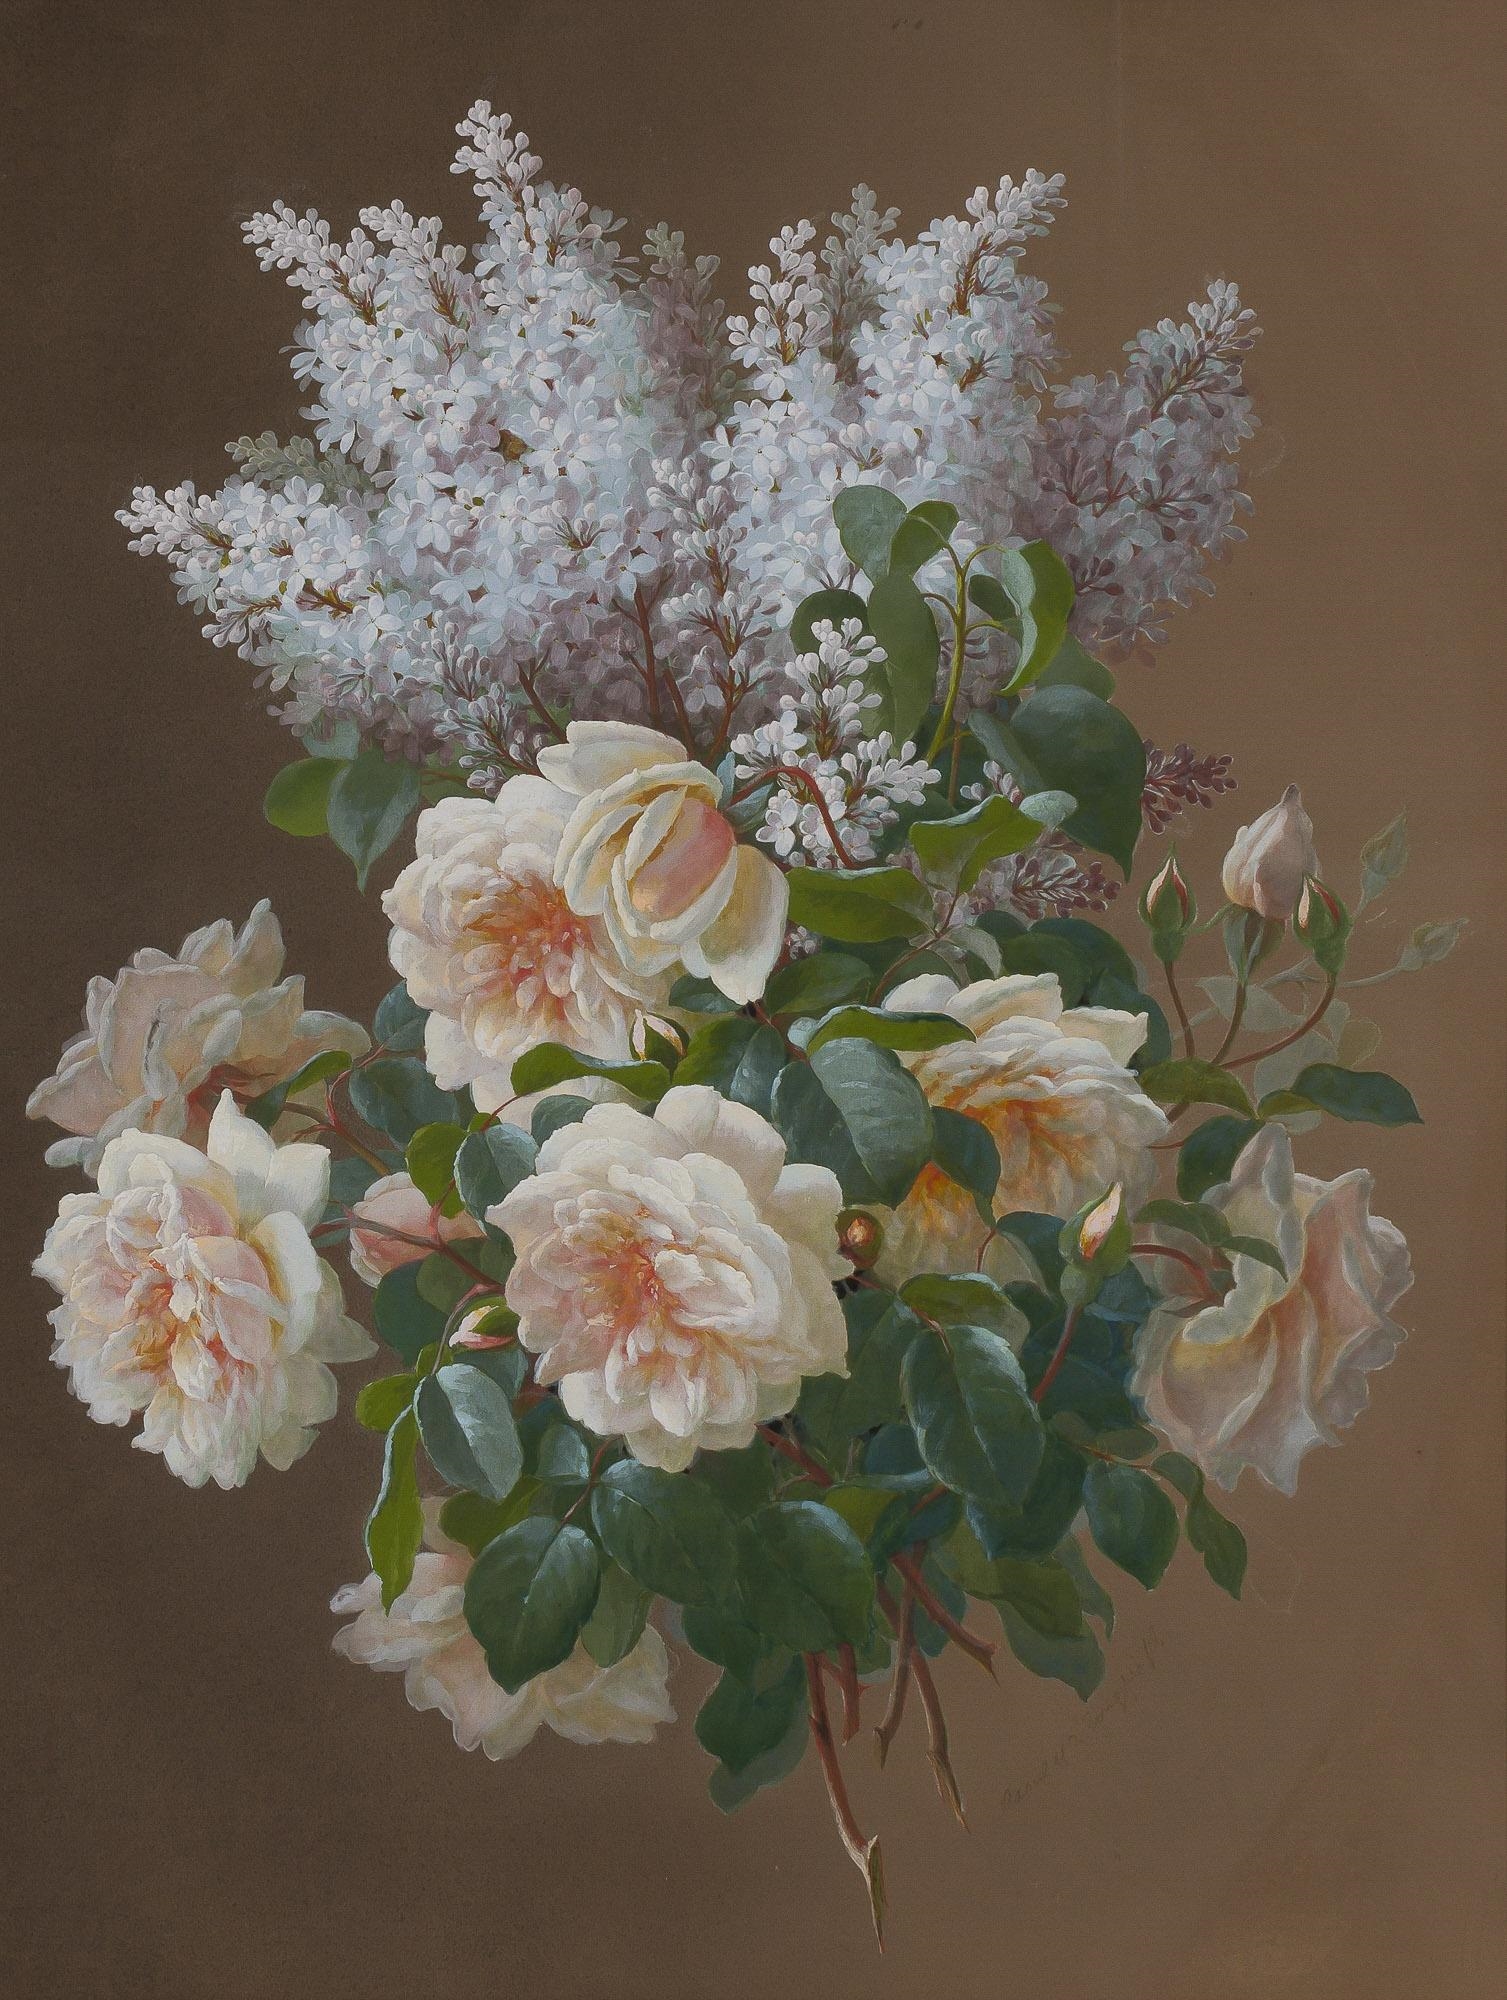 Lilacs and Roses by Raoul M. de Longpre